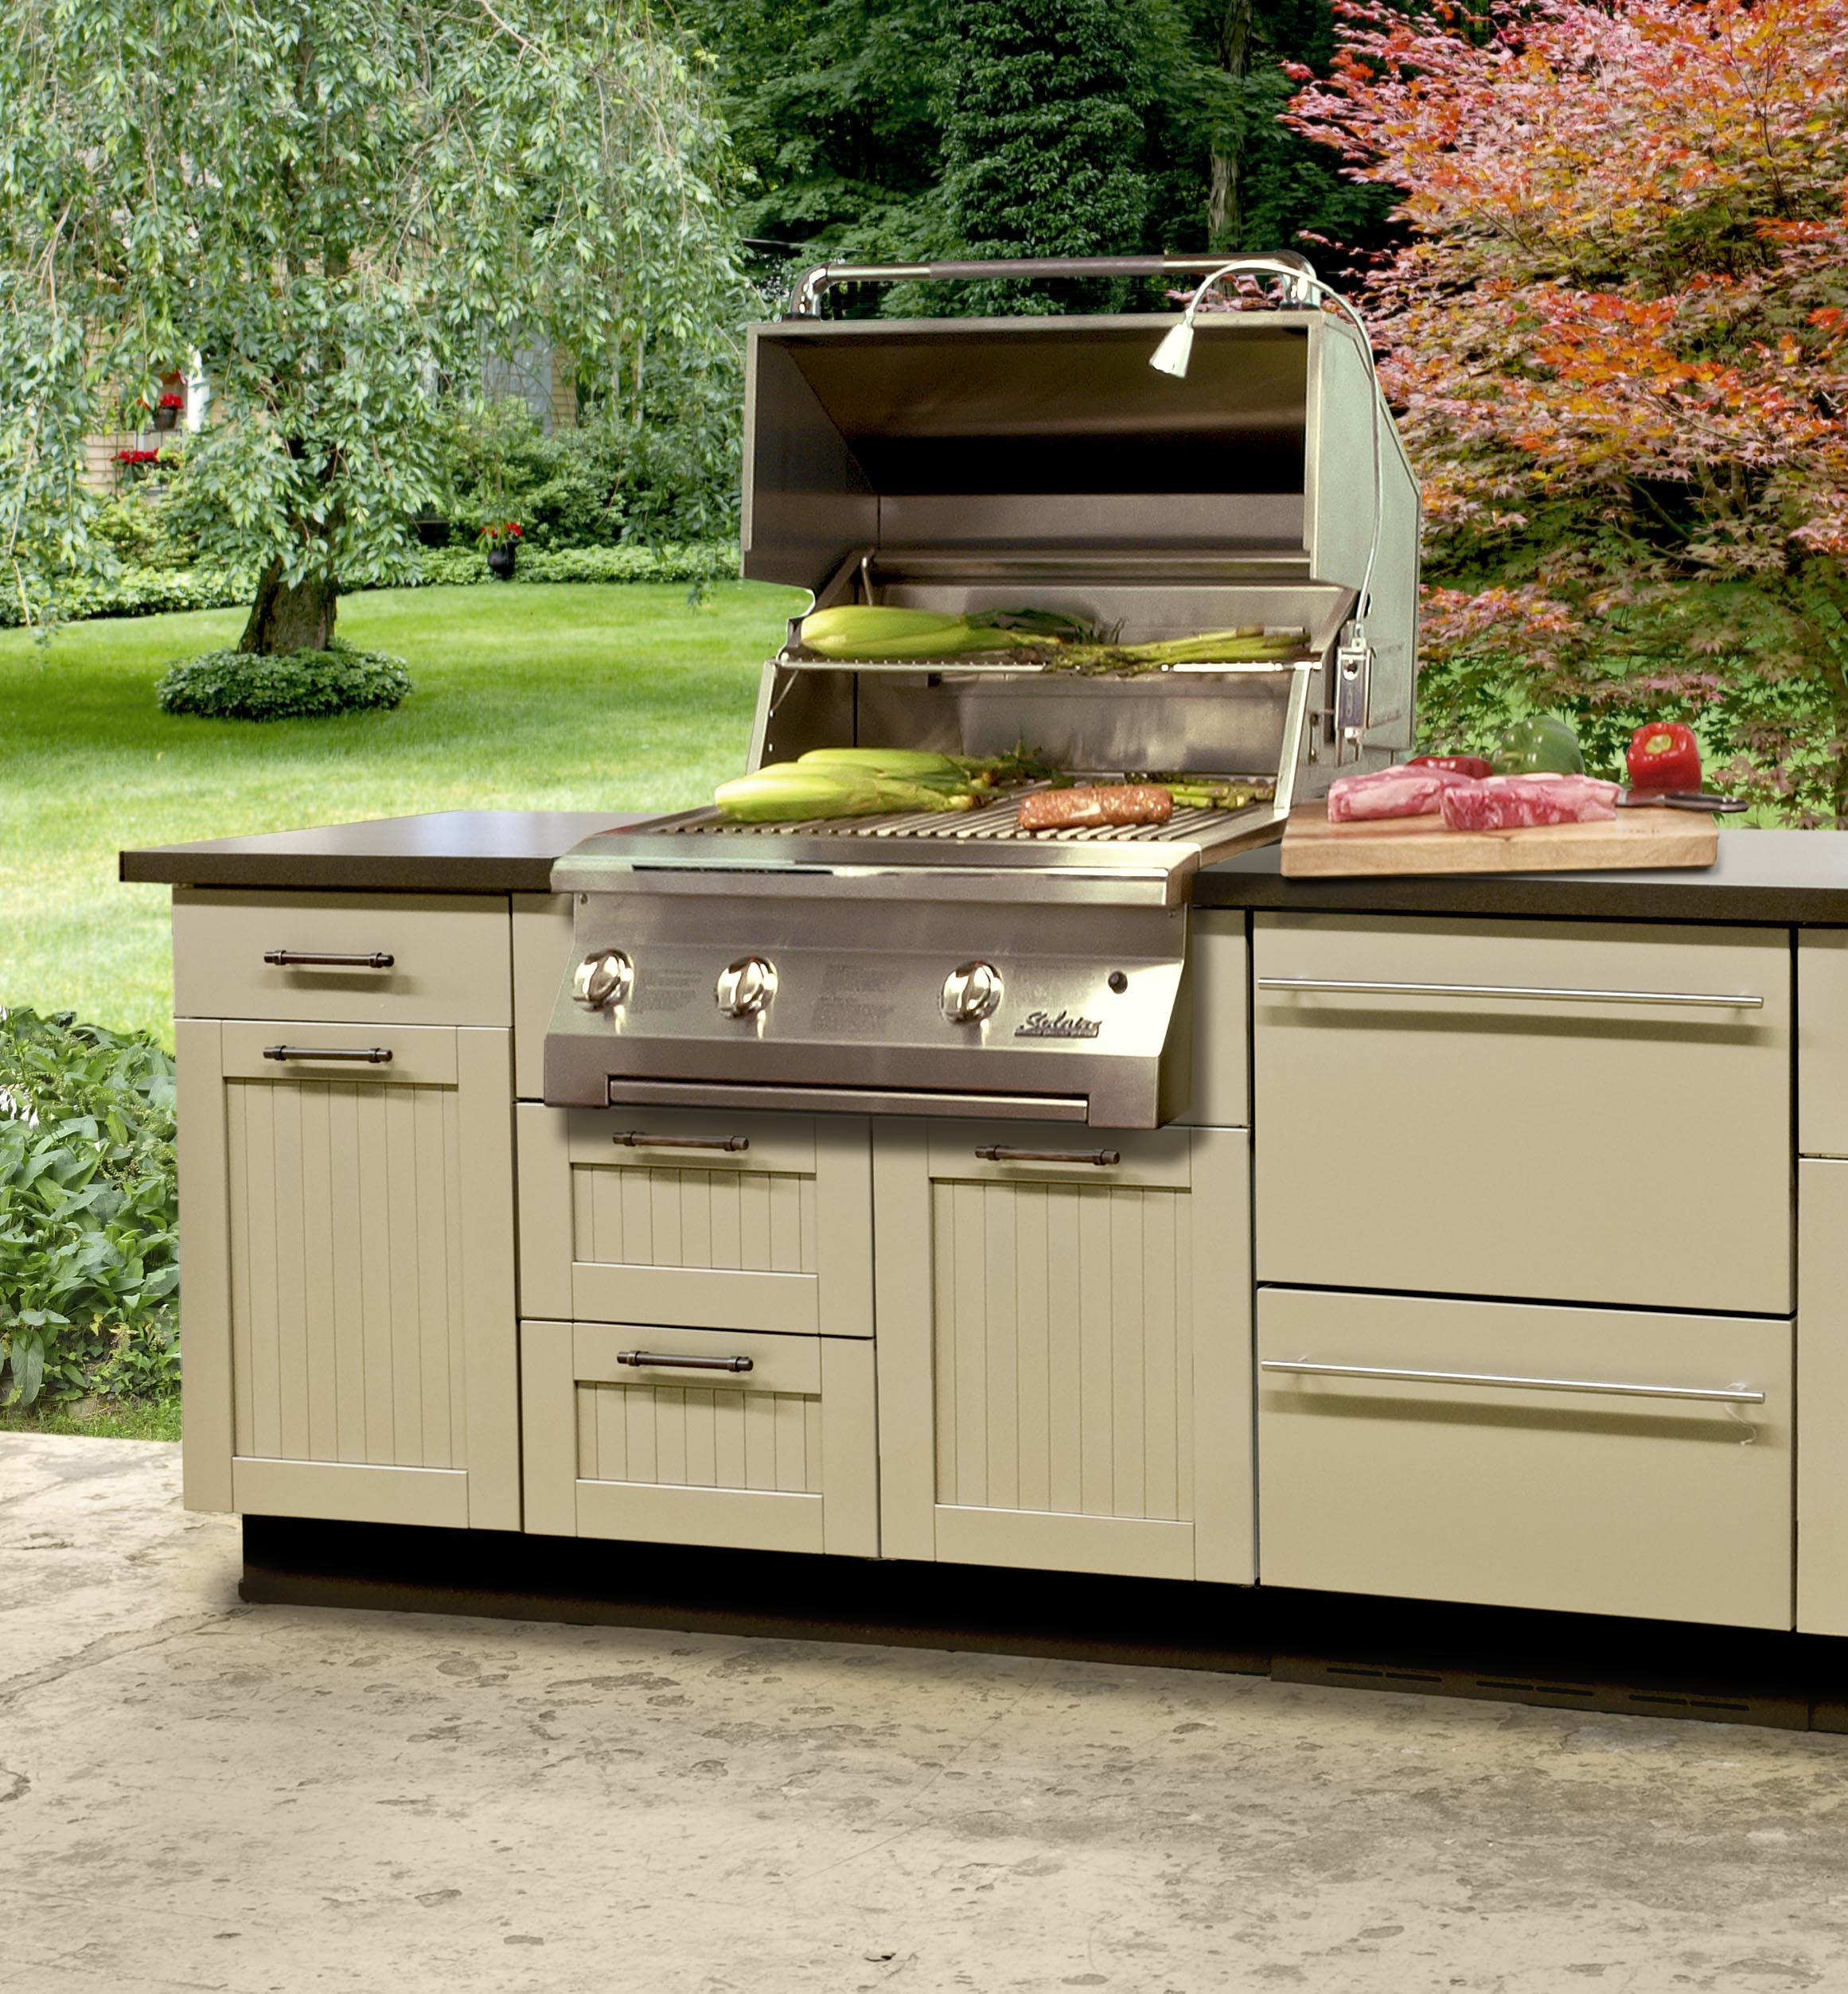 Lowes Outdoor Kitchen Grills
 Outdoor kitchen lowes best suited to offer you top notch